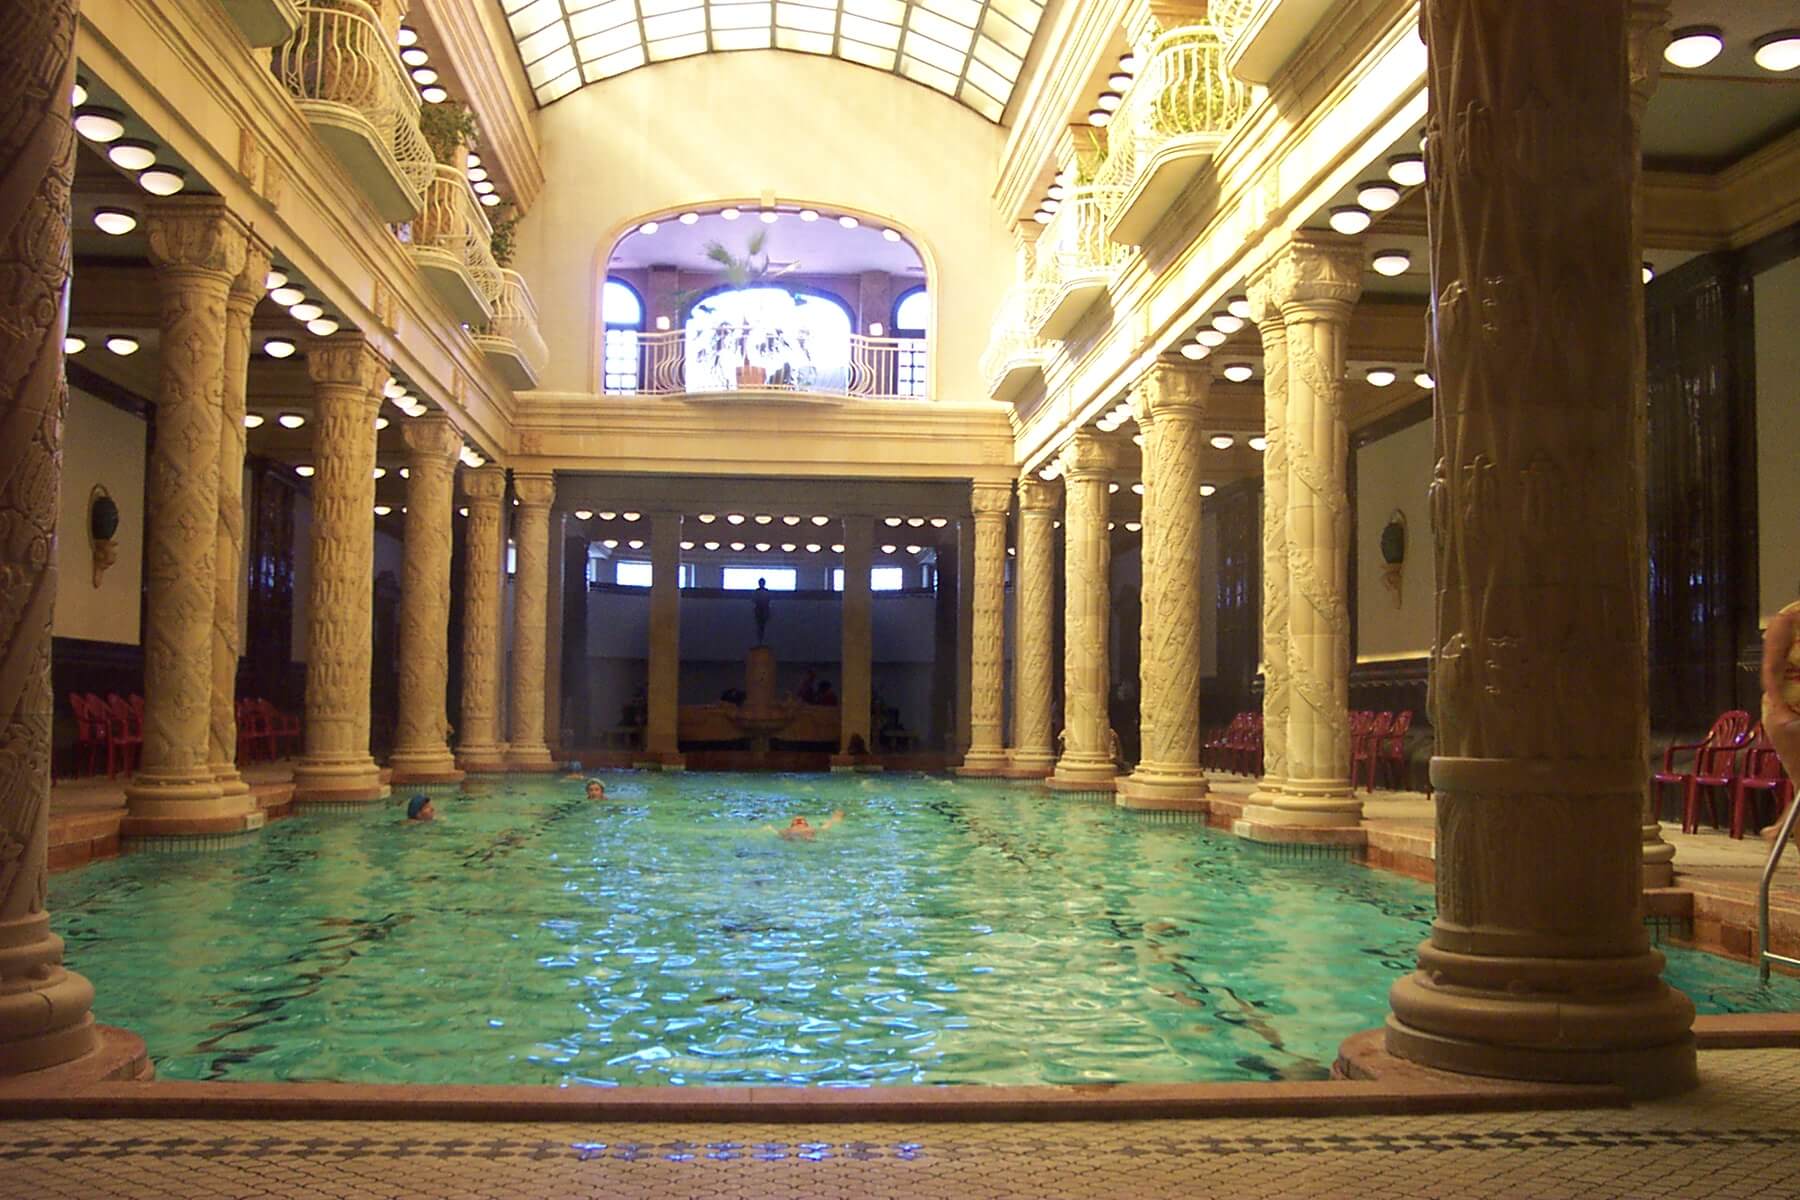  Gellert  Spa In Budapest The Popular Thermal Spa In Budapest